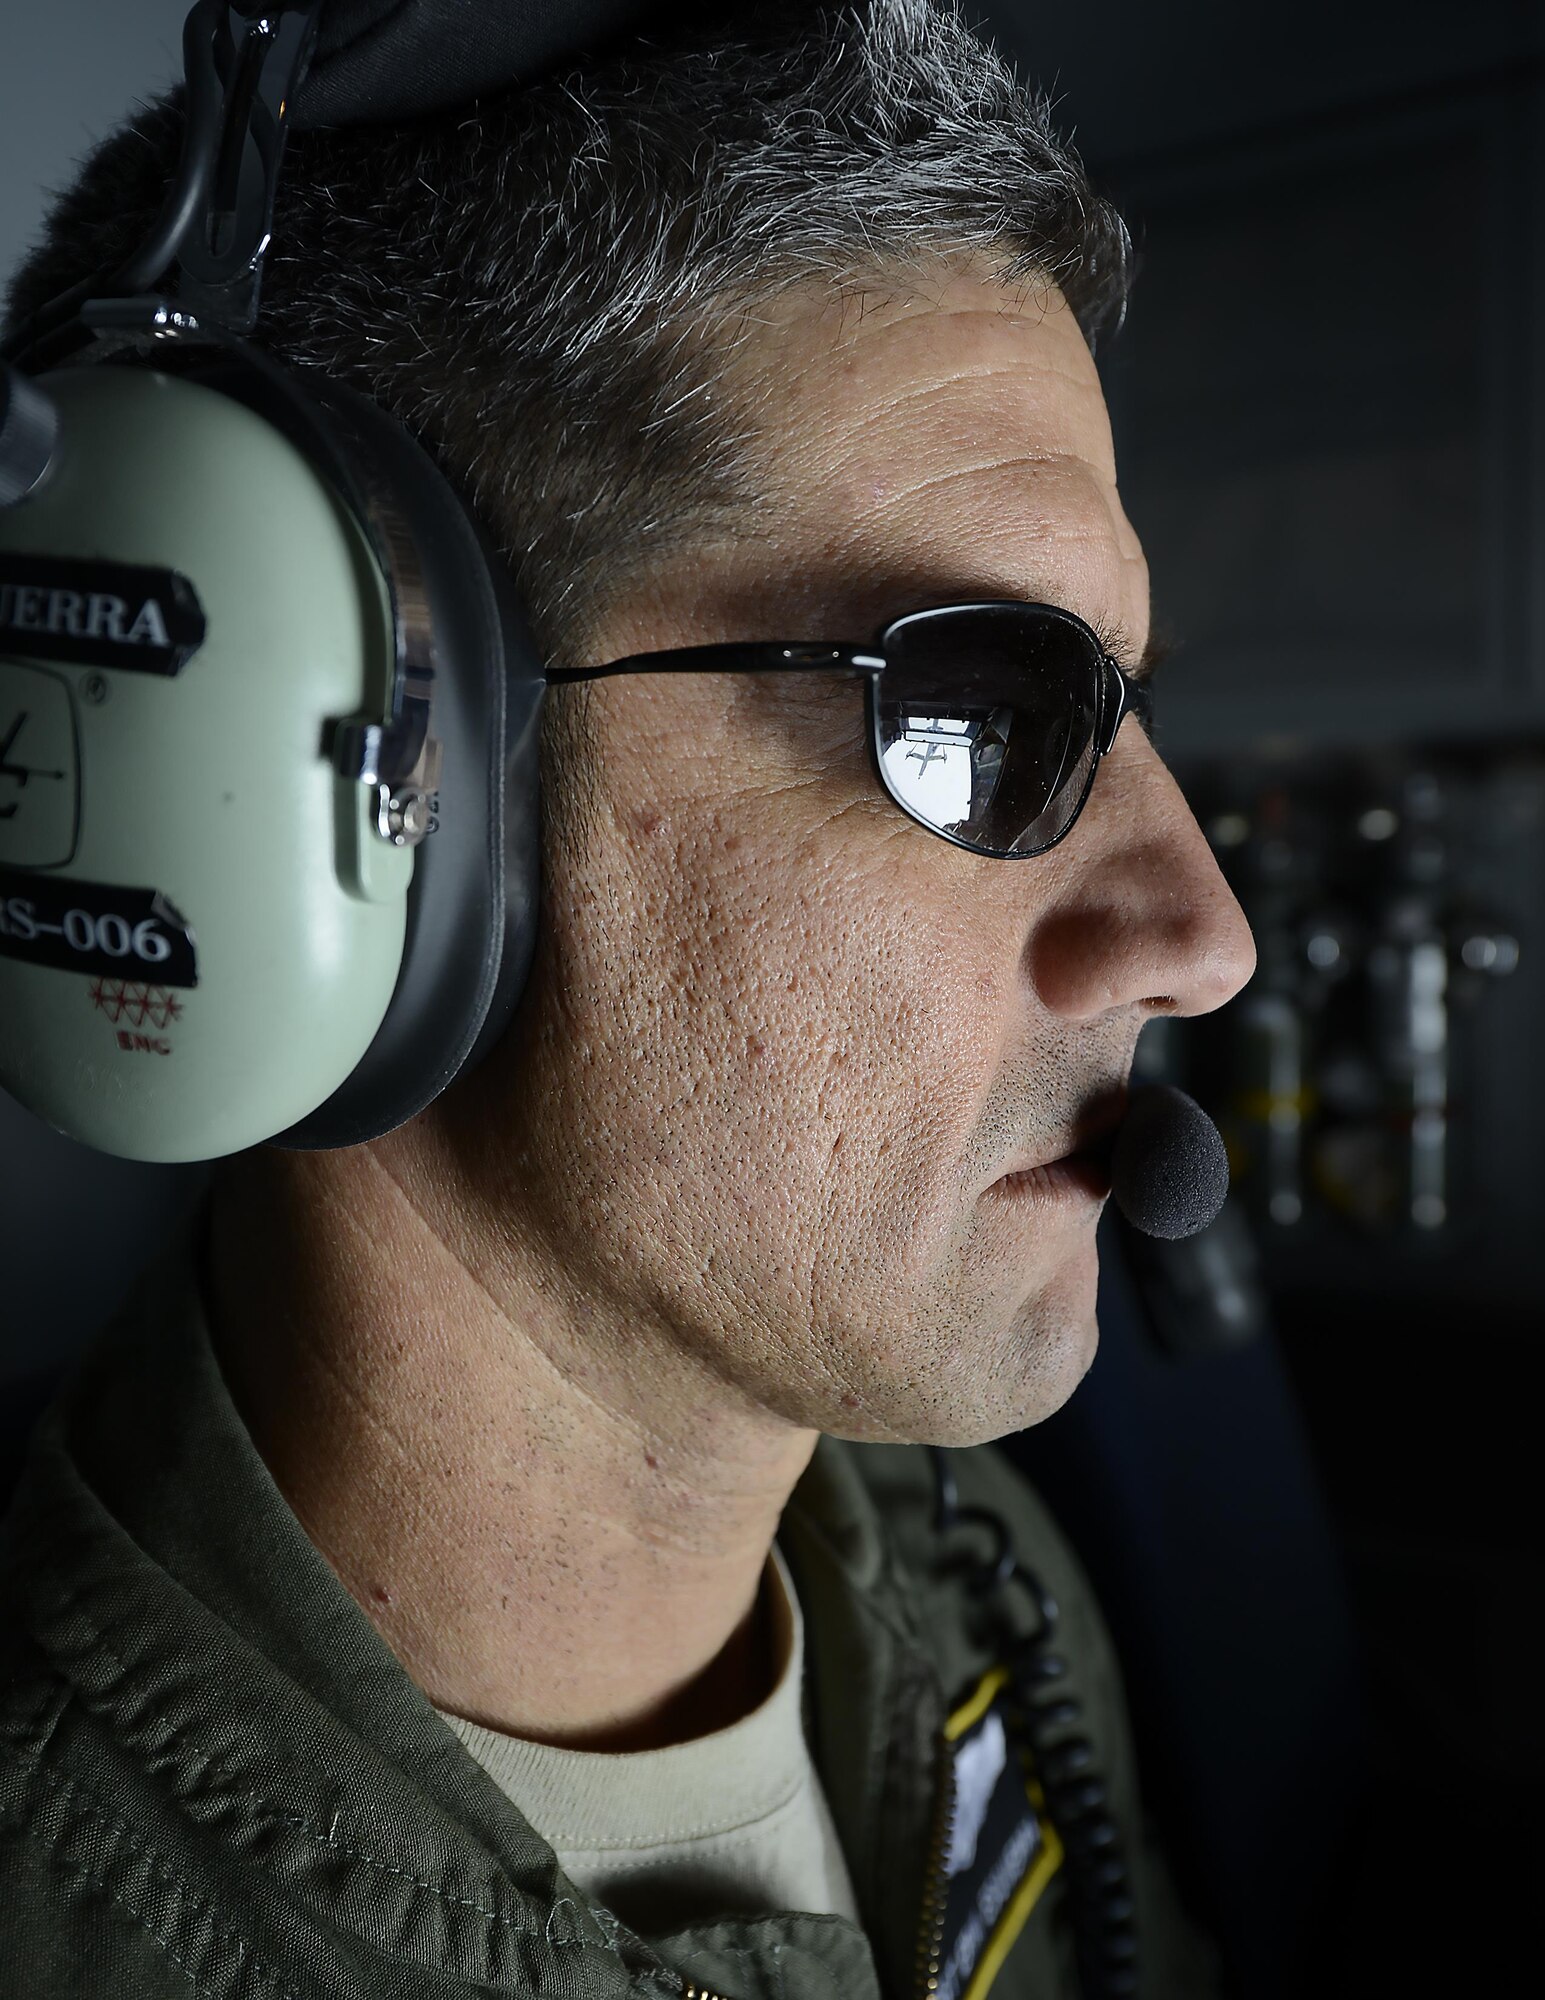 U.S. Air Force Tech. Sgt. Erik Esquerra, a KC-10 Extender boom operator with the 9th Air Refueling Squadron based out of Travis Air Force Base, Calif., prepares to conduct in-flight refueling for multiple aircraft during Northern Edge 2017, May 4, 2017. NE17 is Alaska’s premier joint training exercise designed to practice operations, techniques and procedures as well as enhance interoperability among the services.